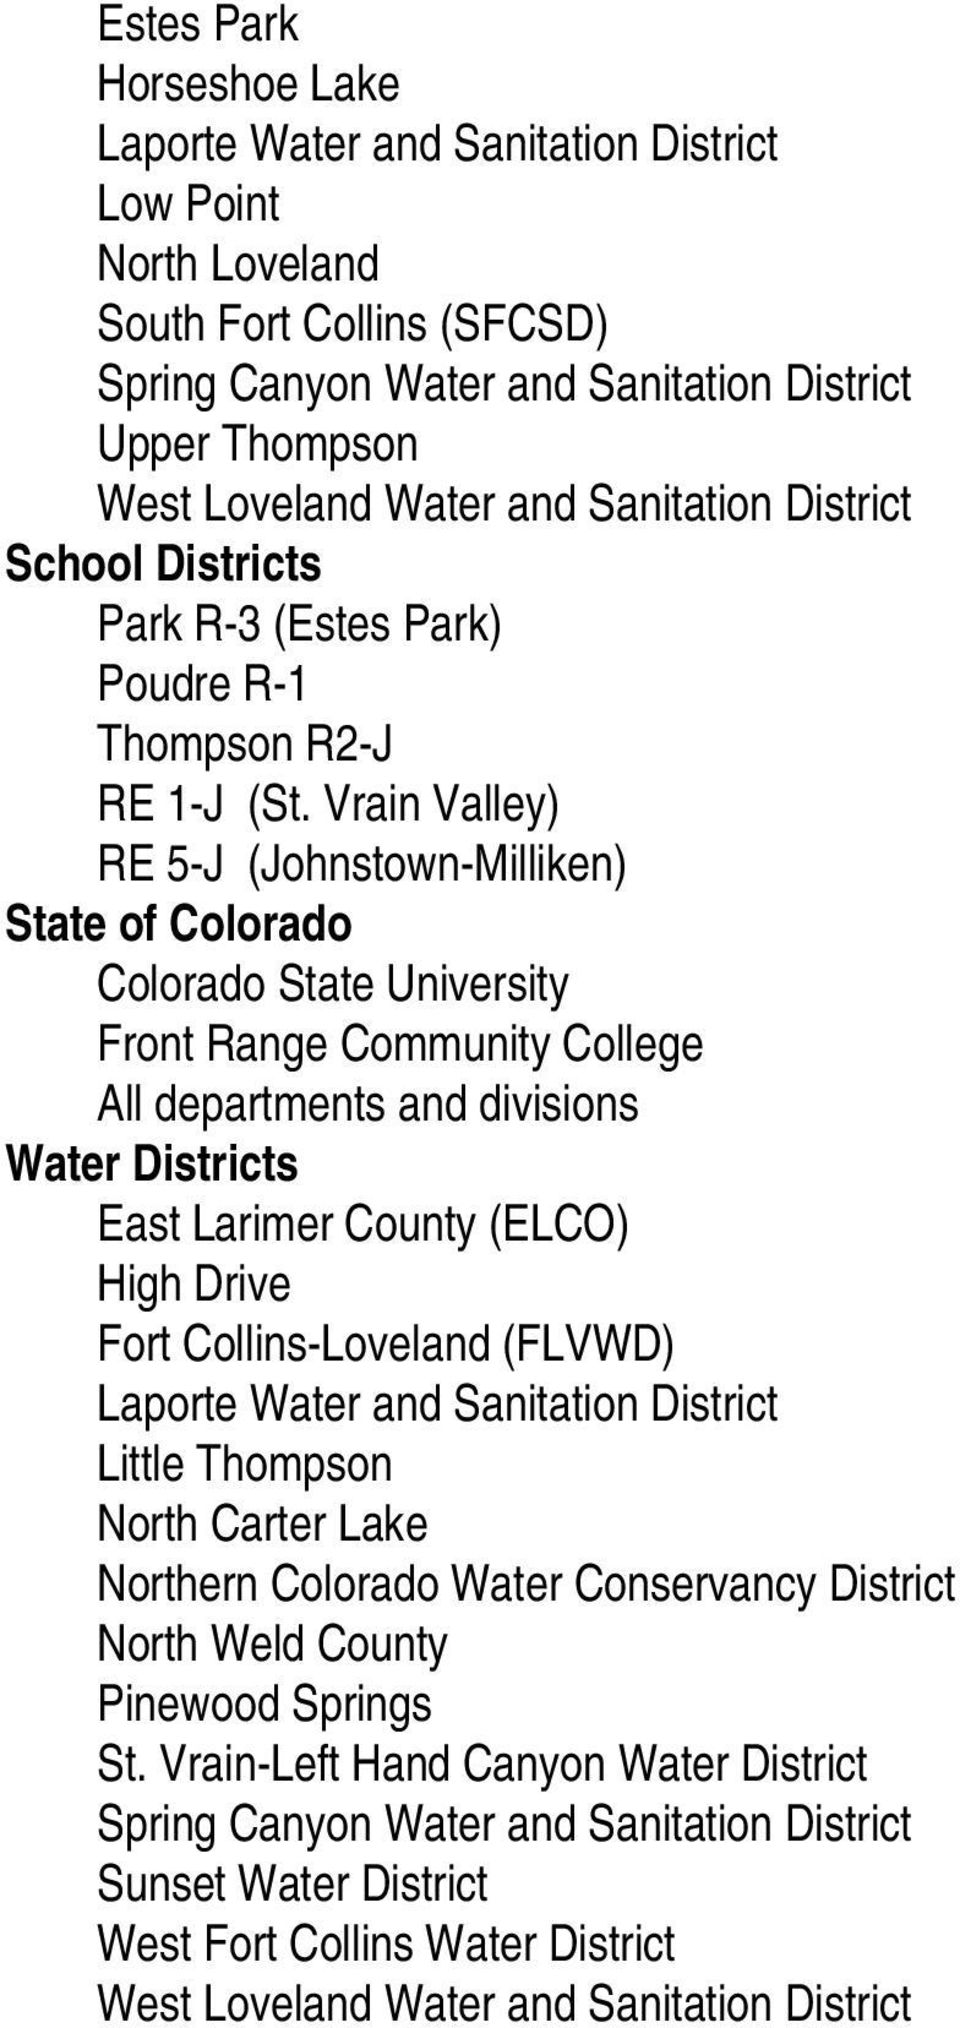 Vrain Valley) RE 5-J (Johnstown-Milliken) State of Colorado Colorado State University Front Range Community College All departments and divisions Water Districts East Larimer County (ELCO) High Drive